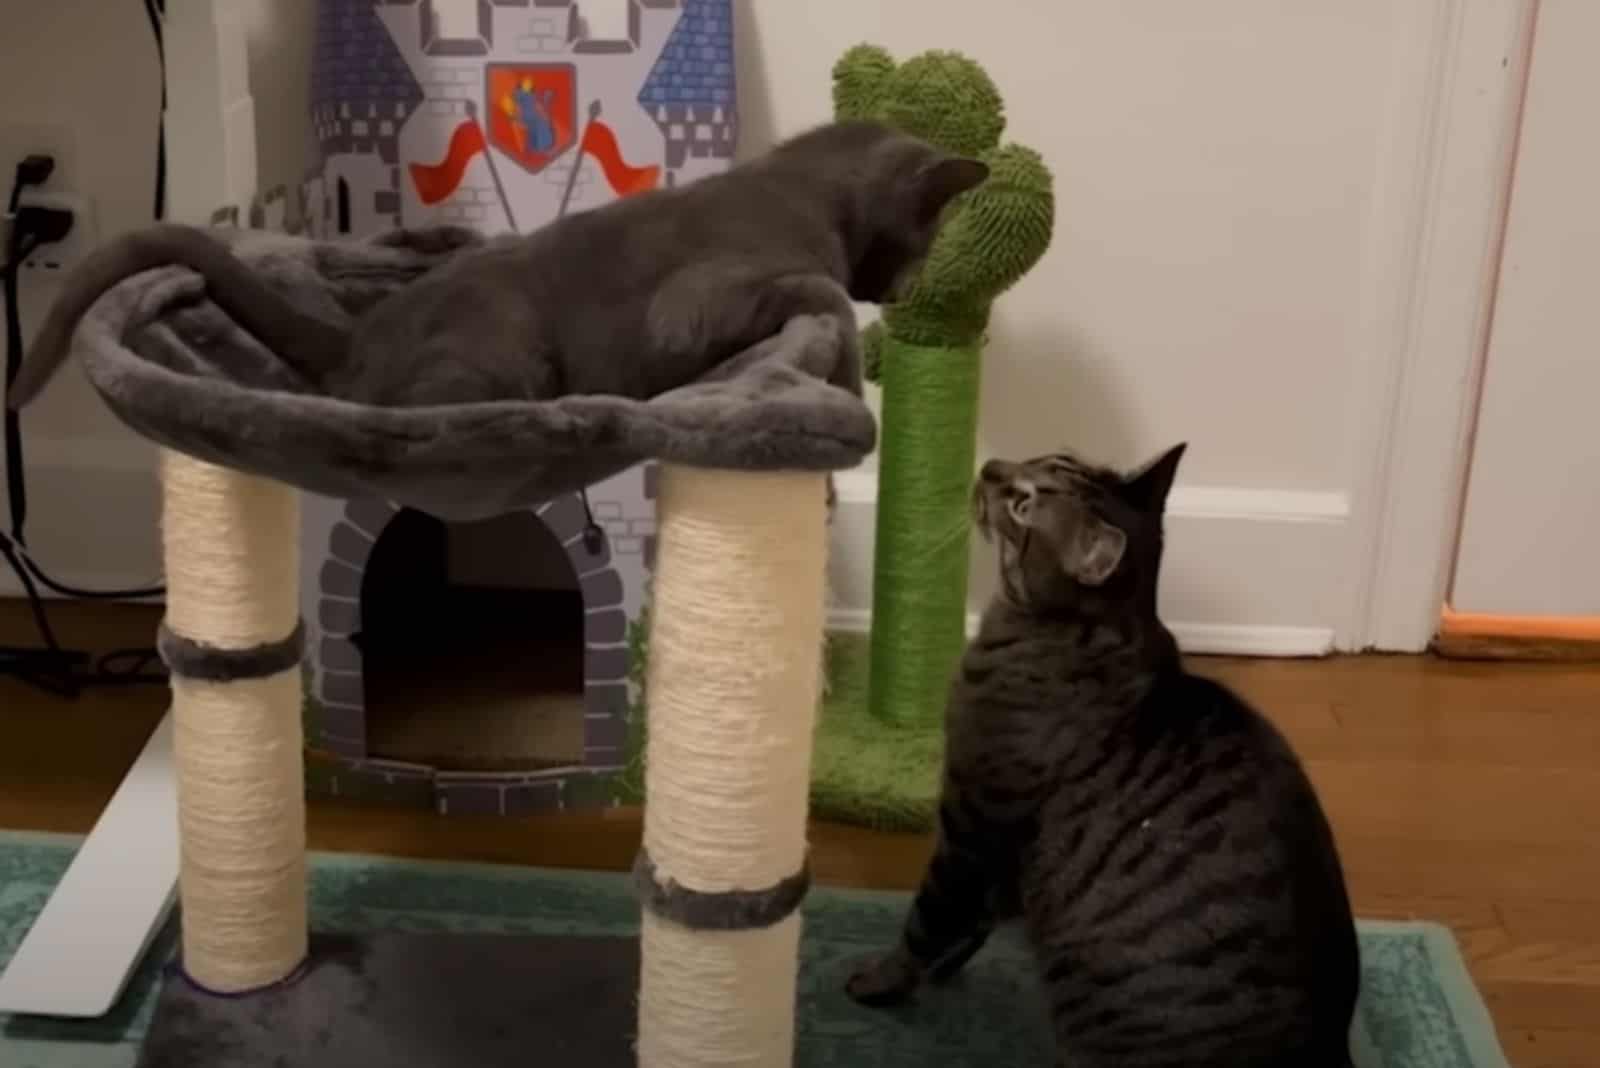 the cat sits and looks at the gray kitten on the scratching post